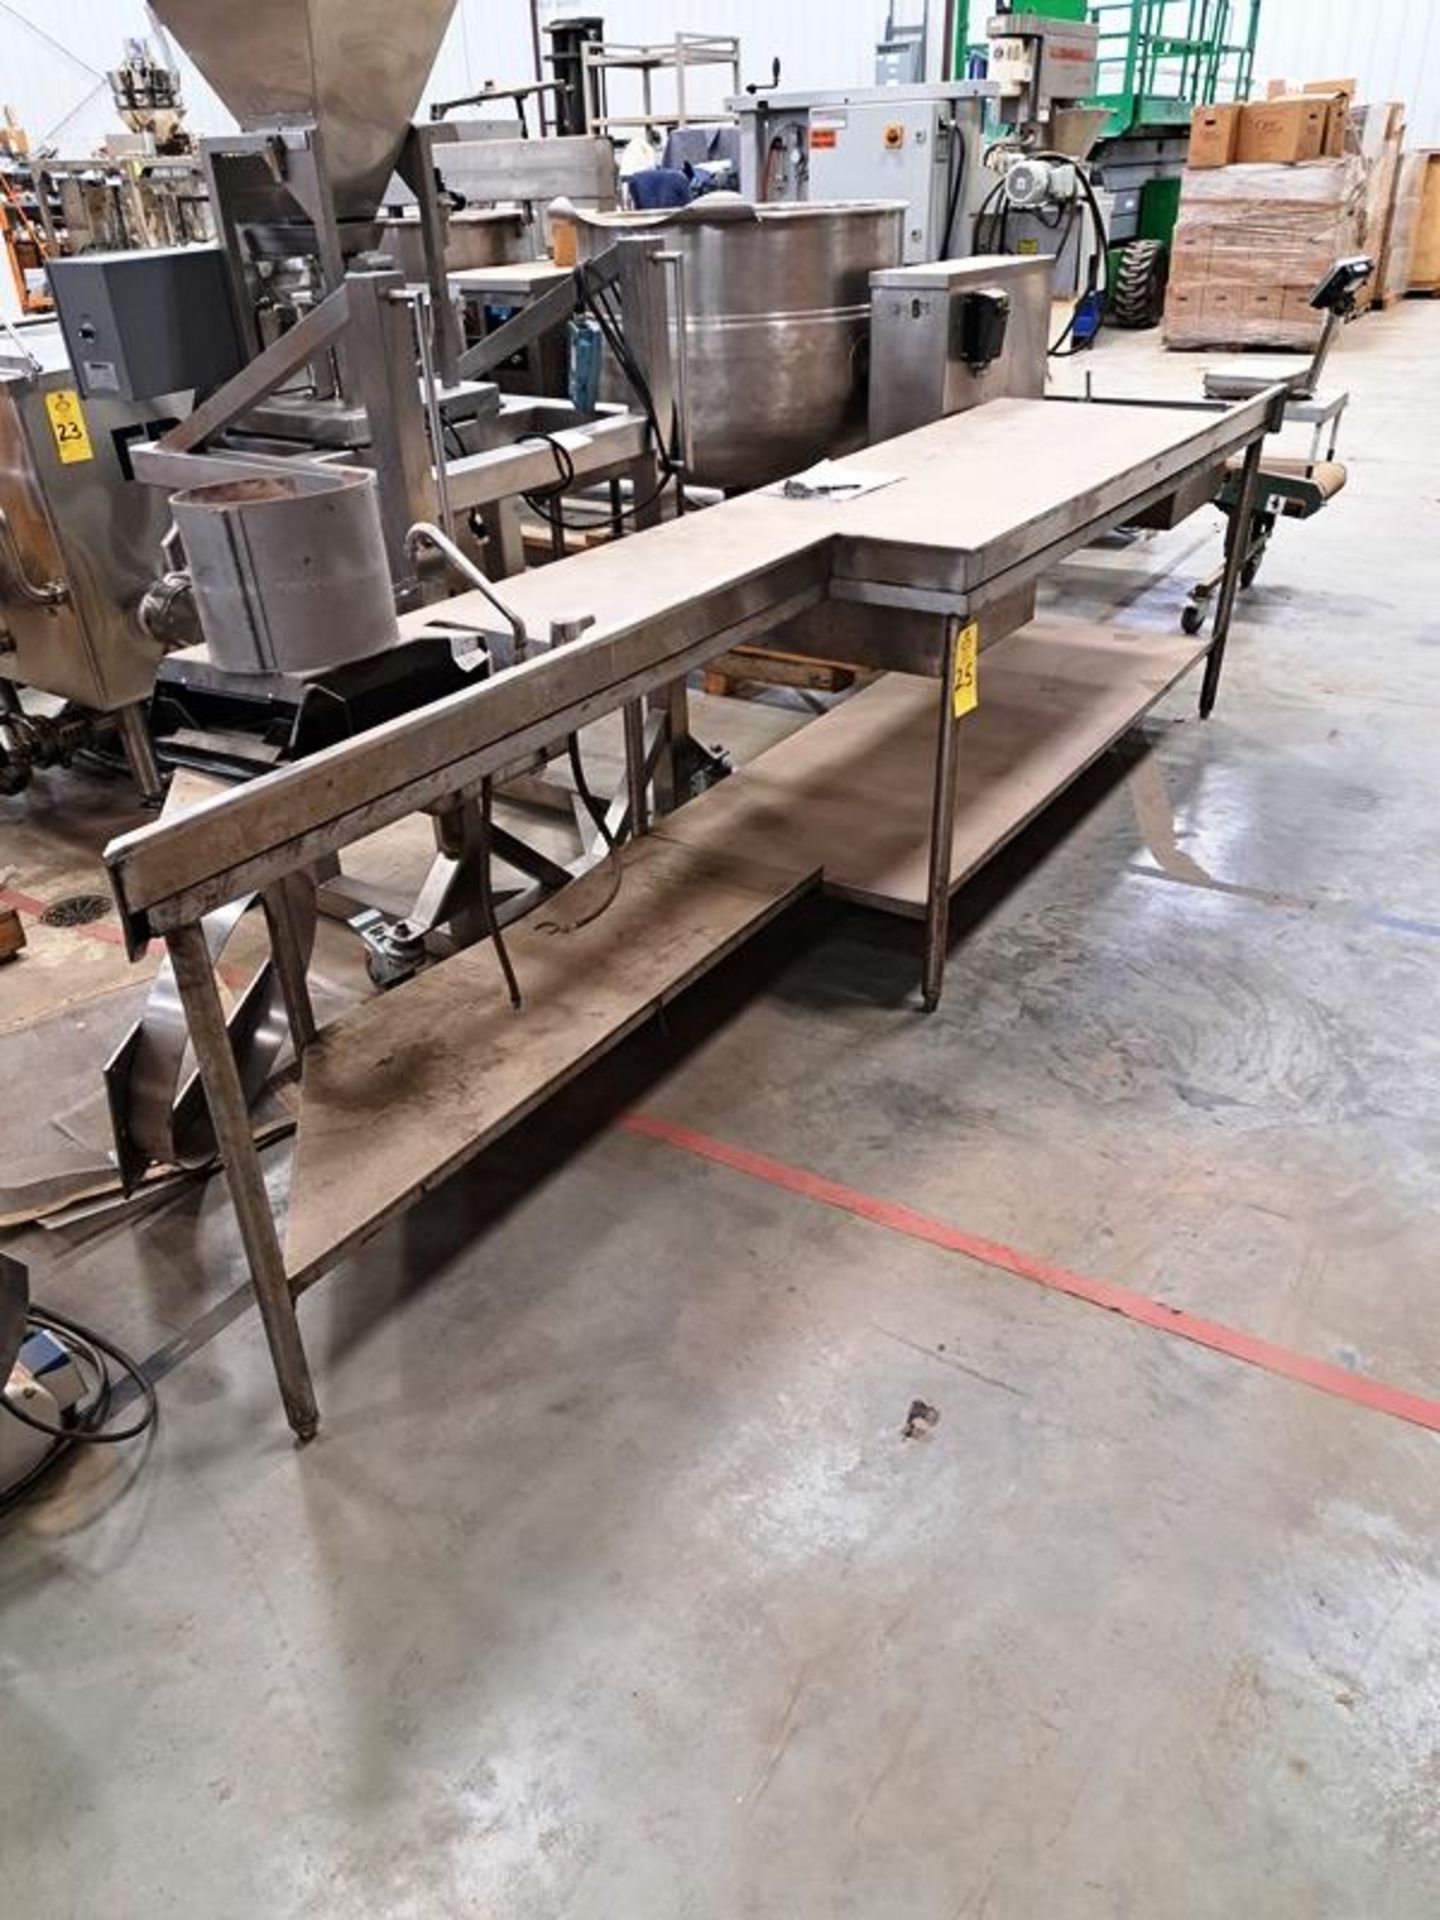 Stainless Steel Table with sink, 32" wide X 12' long, 4" backsplash (Required Loading Fee: $50.00)